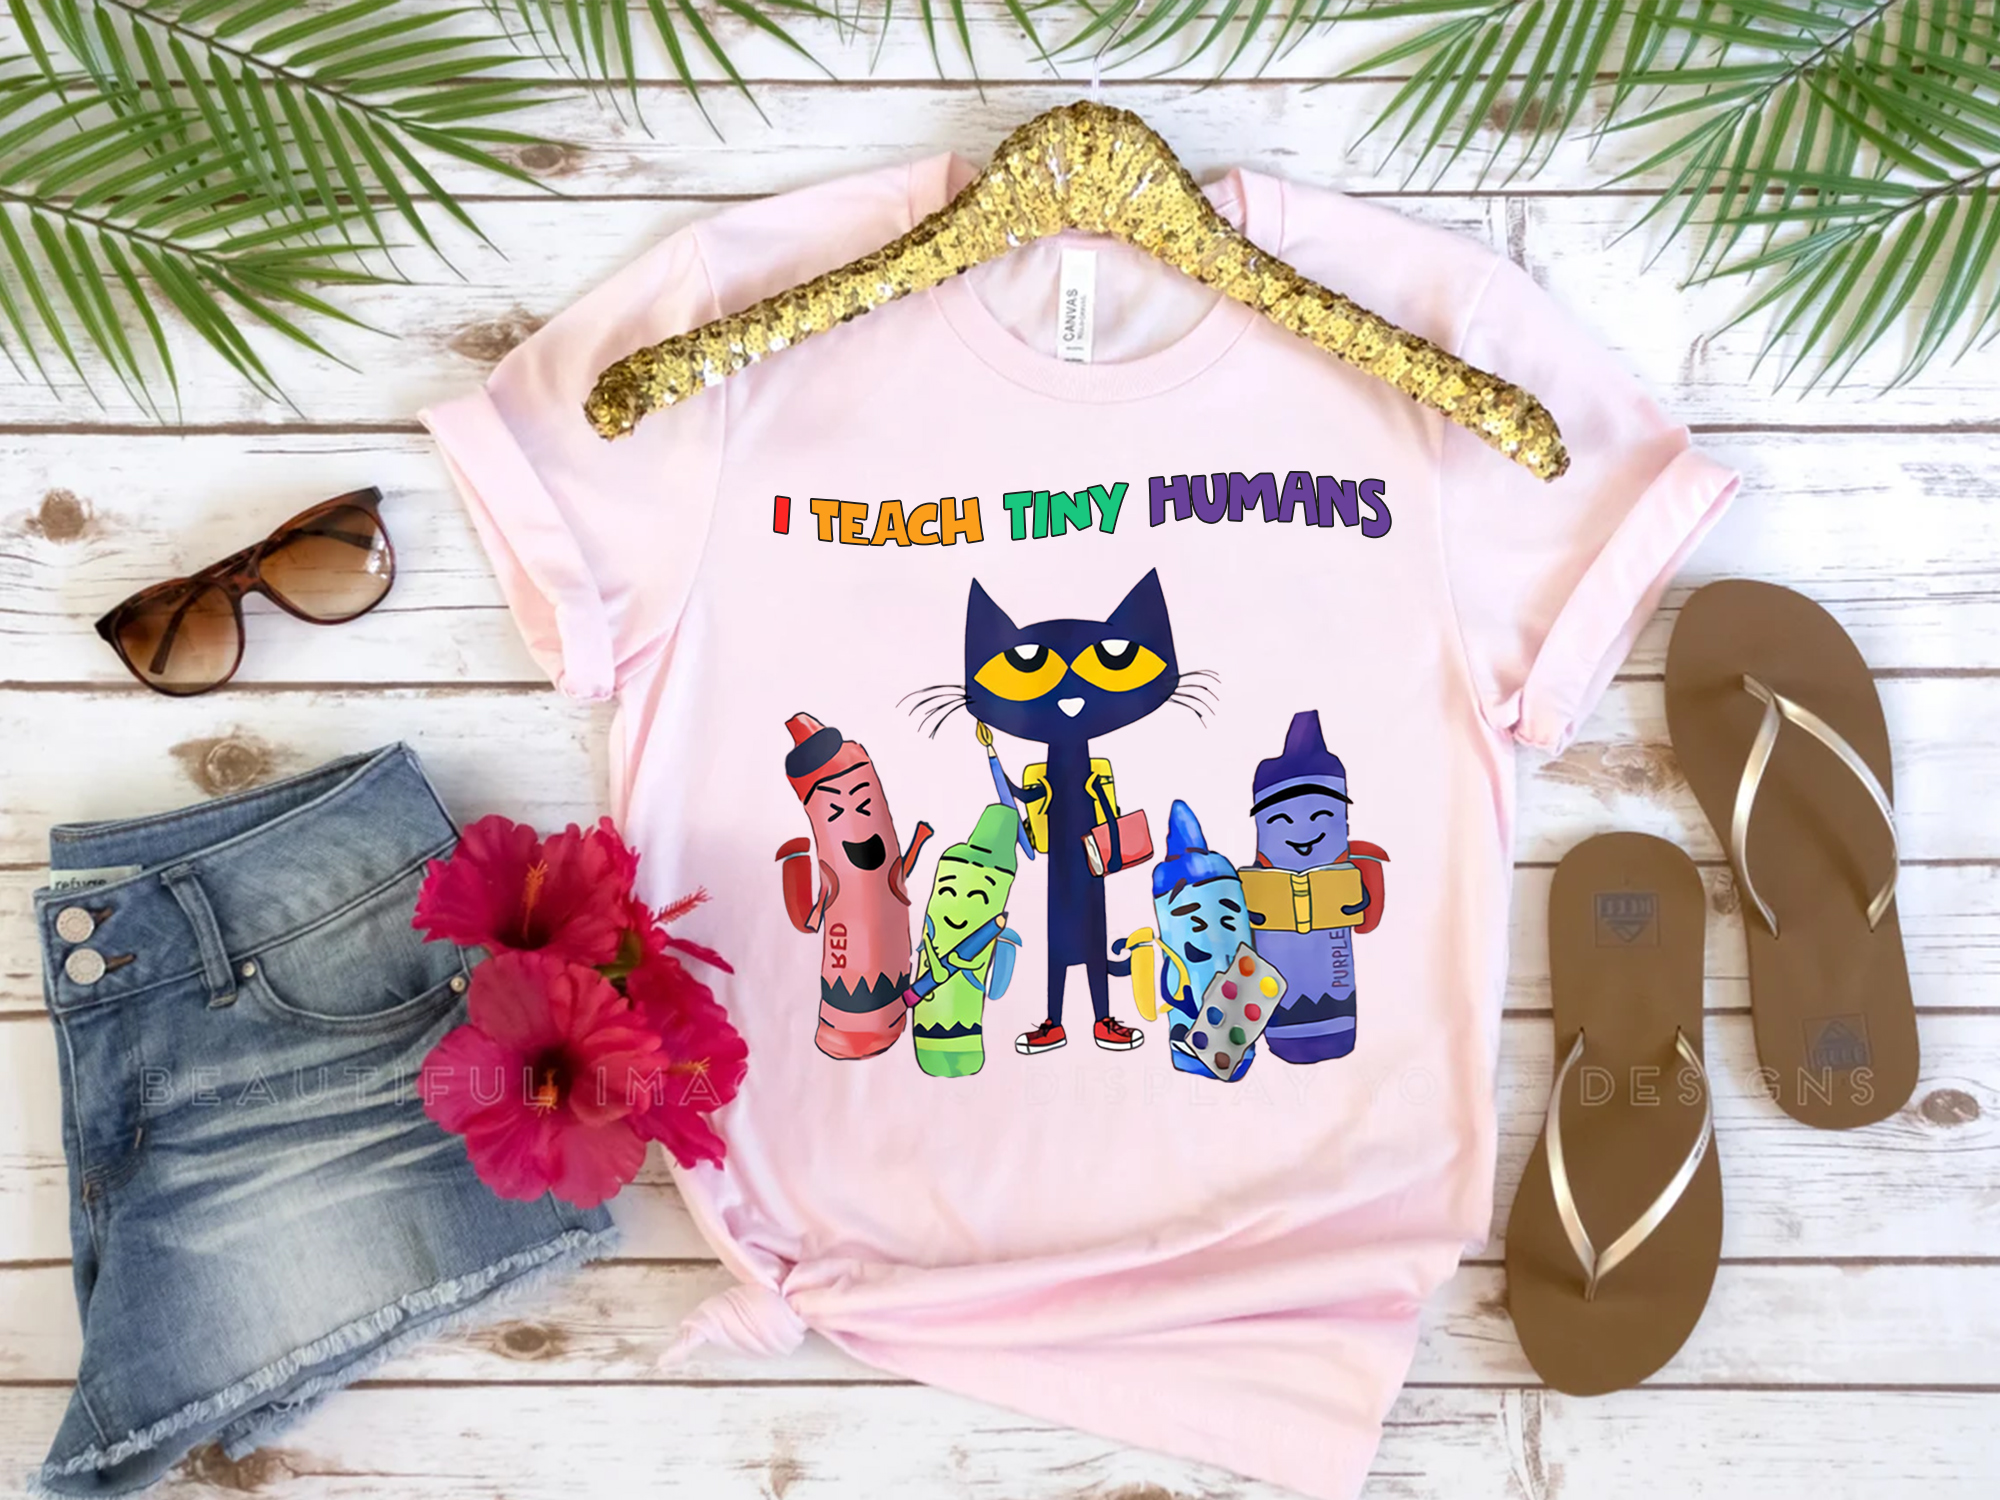 Pete The Cat I Teach Tiny Humans Shirt, Back To School Teacher Life Shirt, Pete The Cat Shirt Gift For Teacher and Student